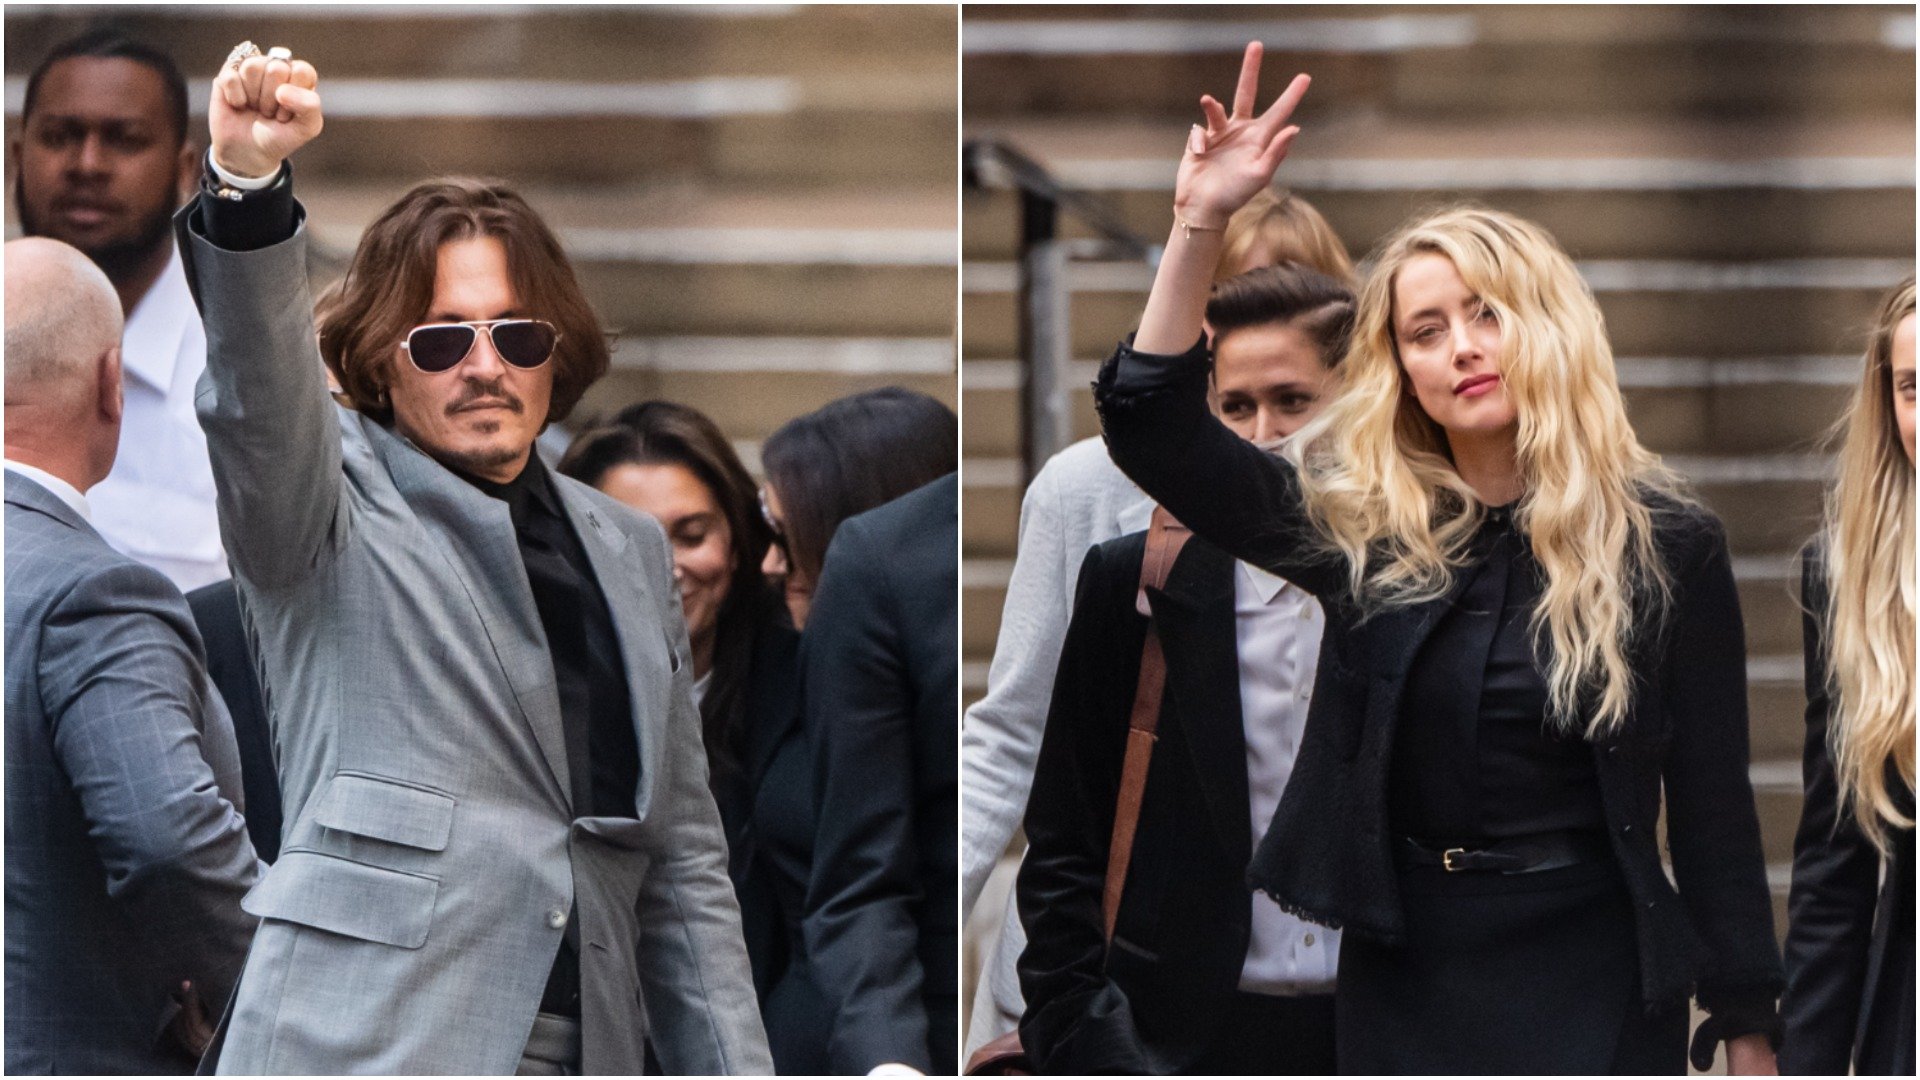 Johnny Depp Vs Amber Heard Trial Courtroom Insider Shares Gut Reaction To Who Could Win Exclusive 